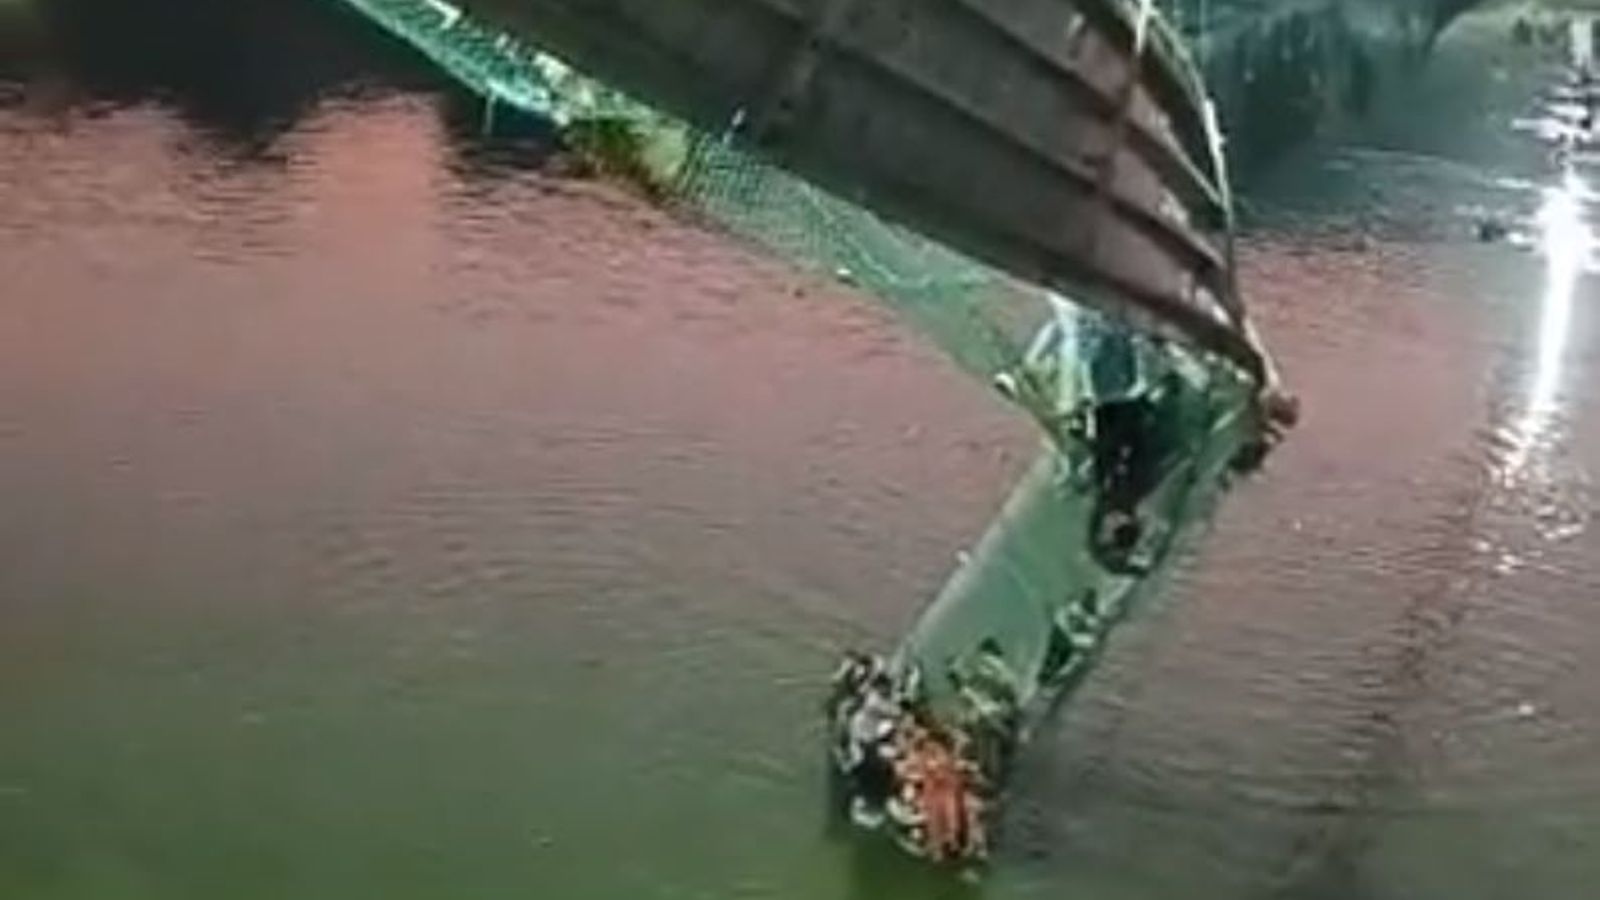 India bridge collapse: 81 people dead after incident in Gujarat state